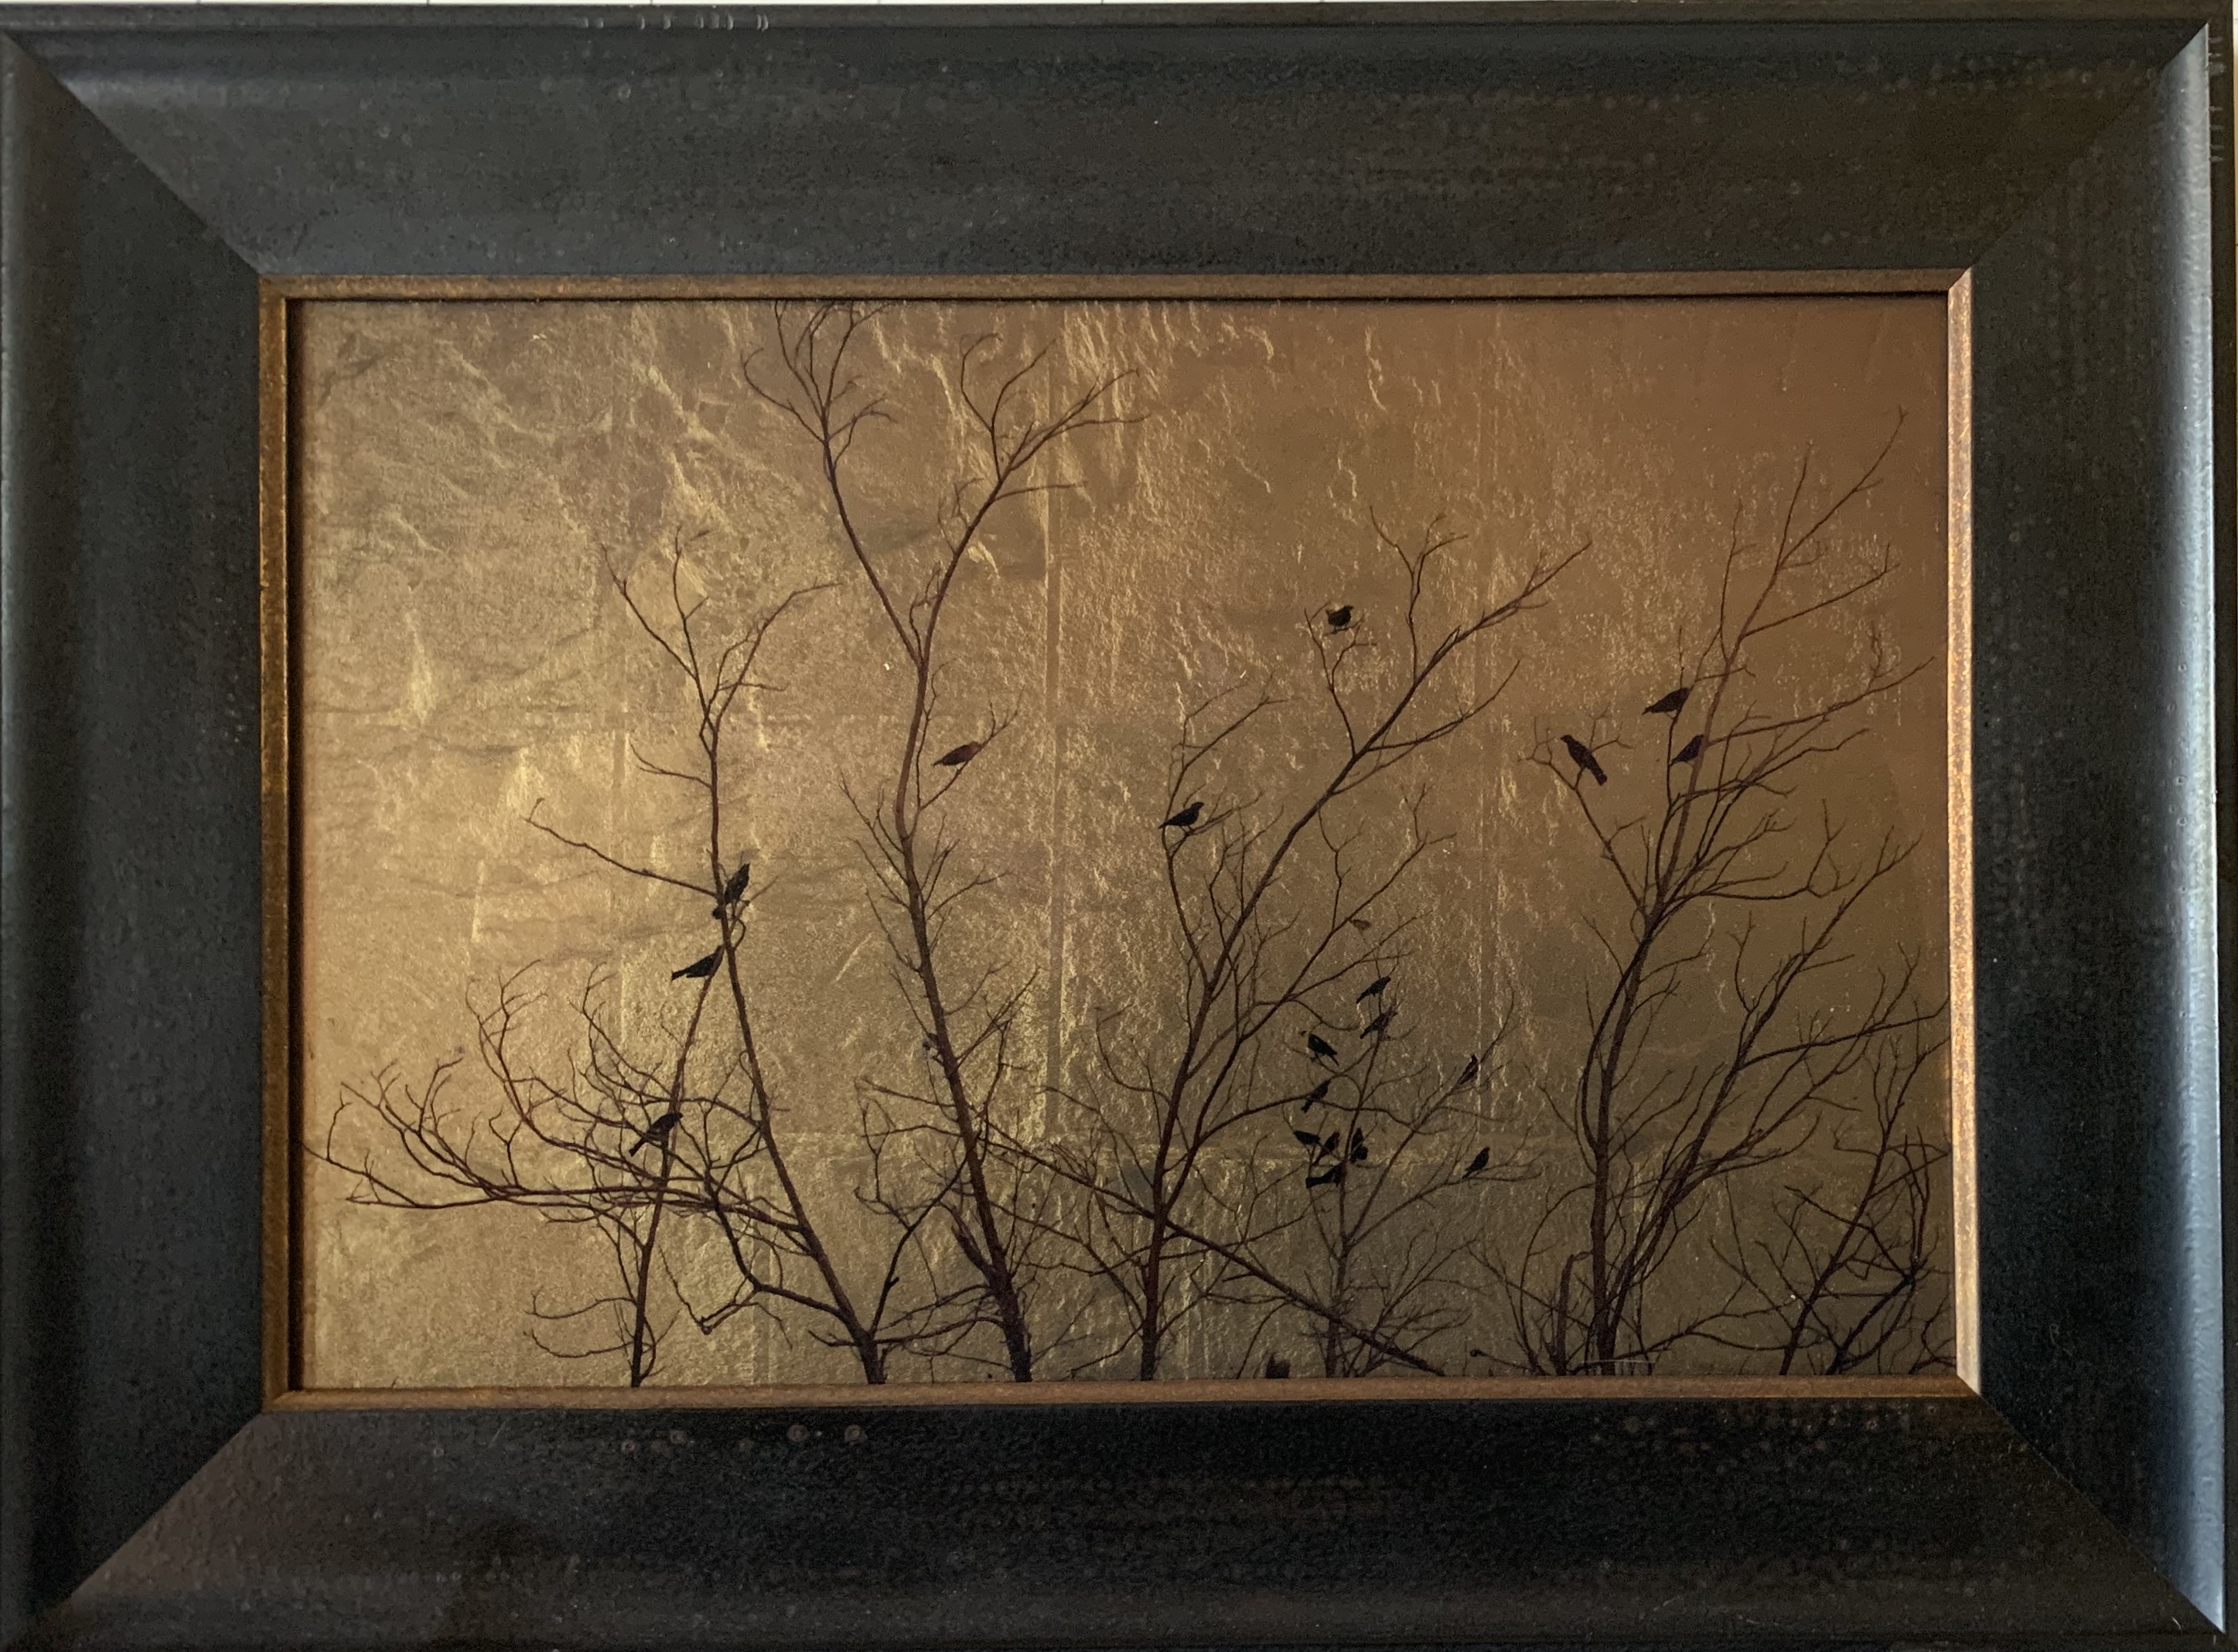 Twenty-two Birds in Bare Tree, New Mexico, Kate Breakey, Modern Day Orotone, Catherine Couturier Gallery